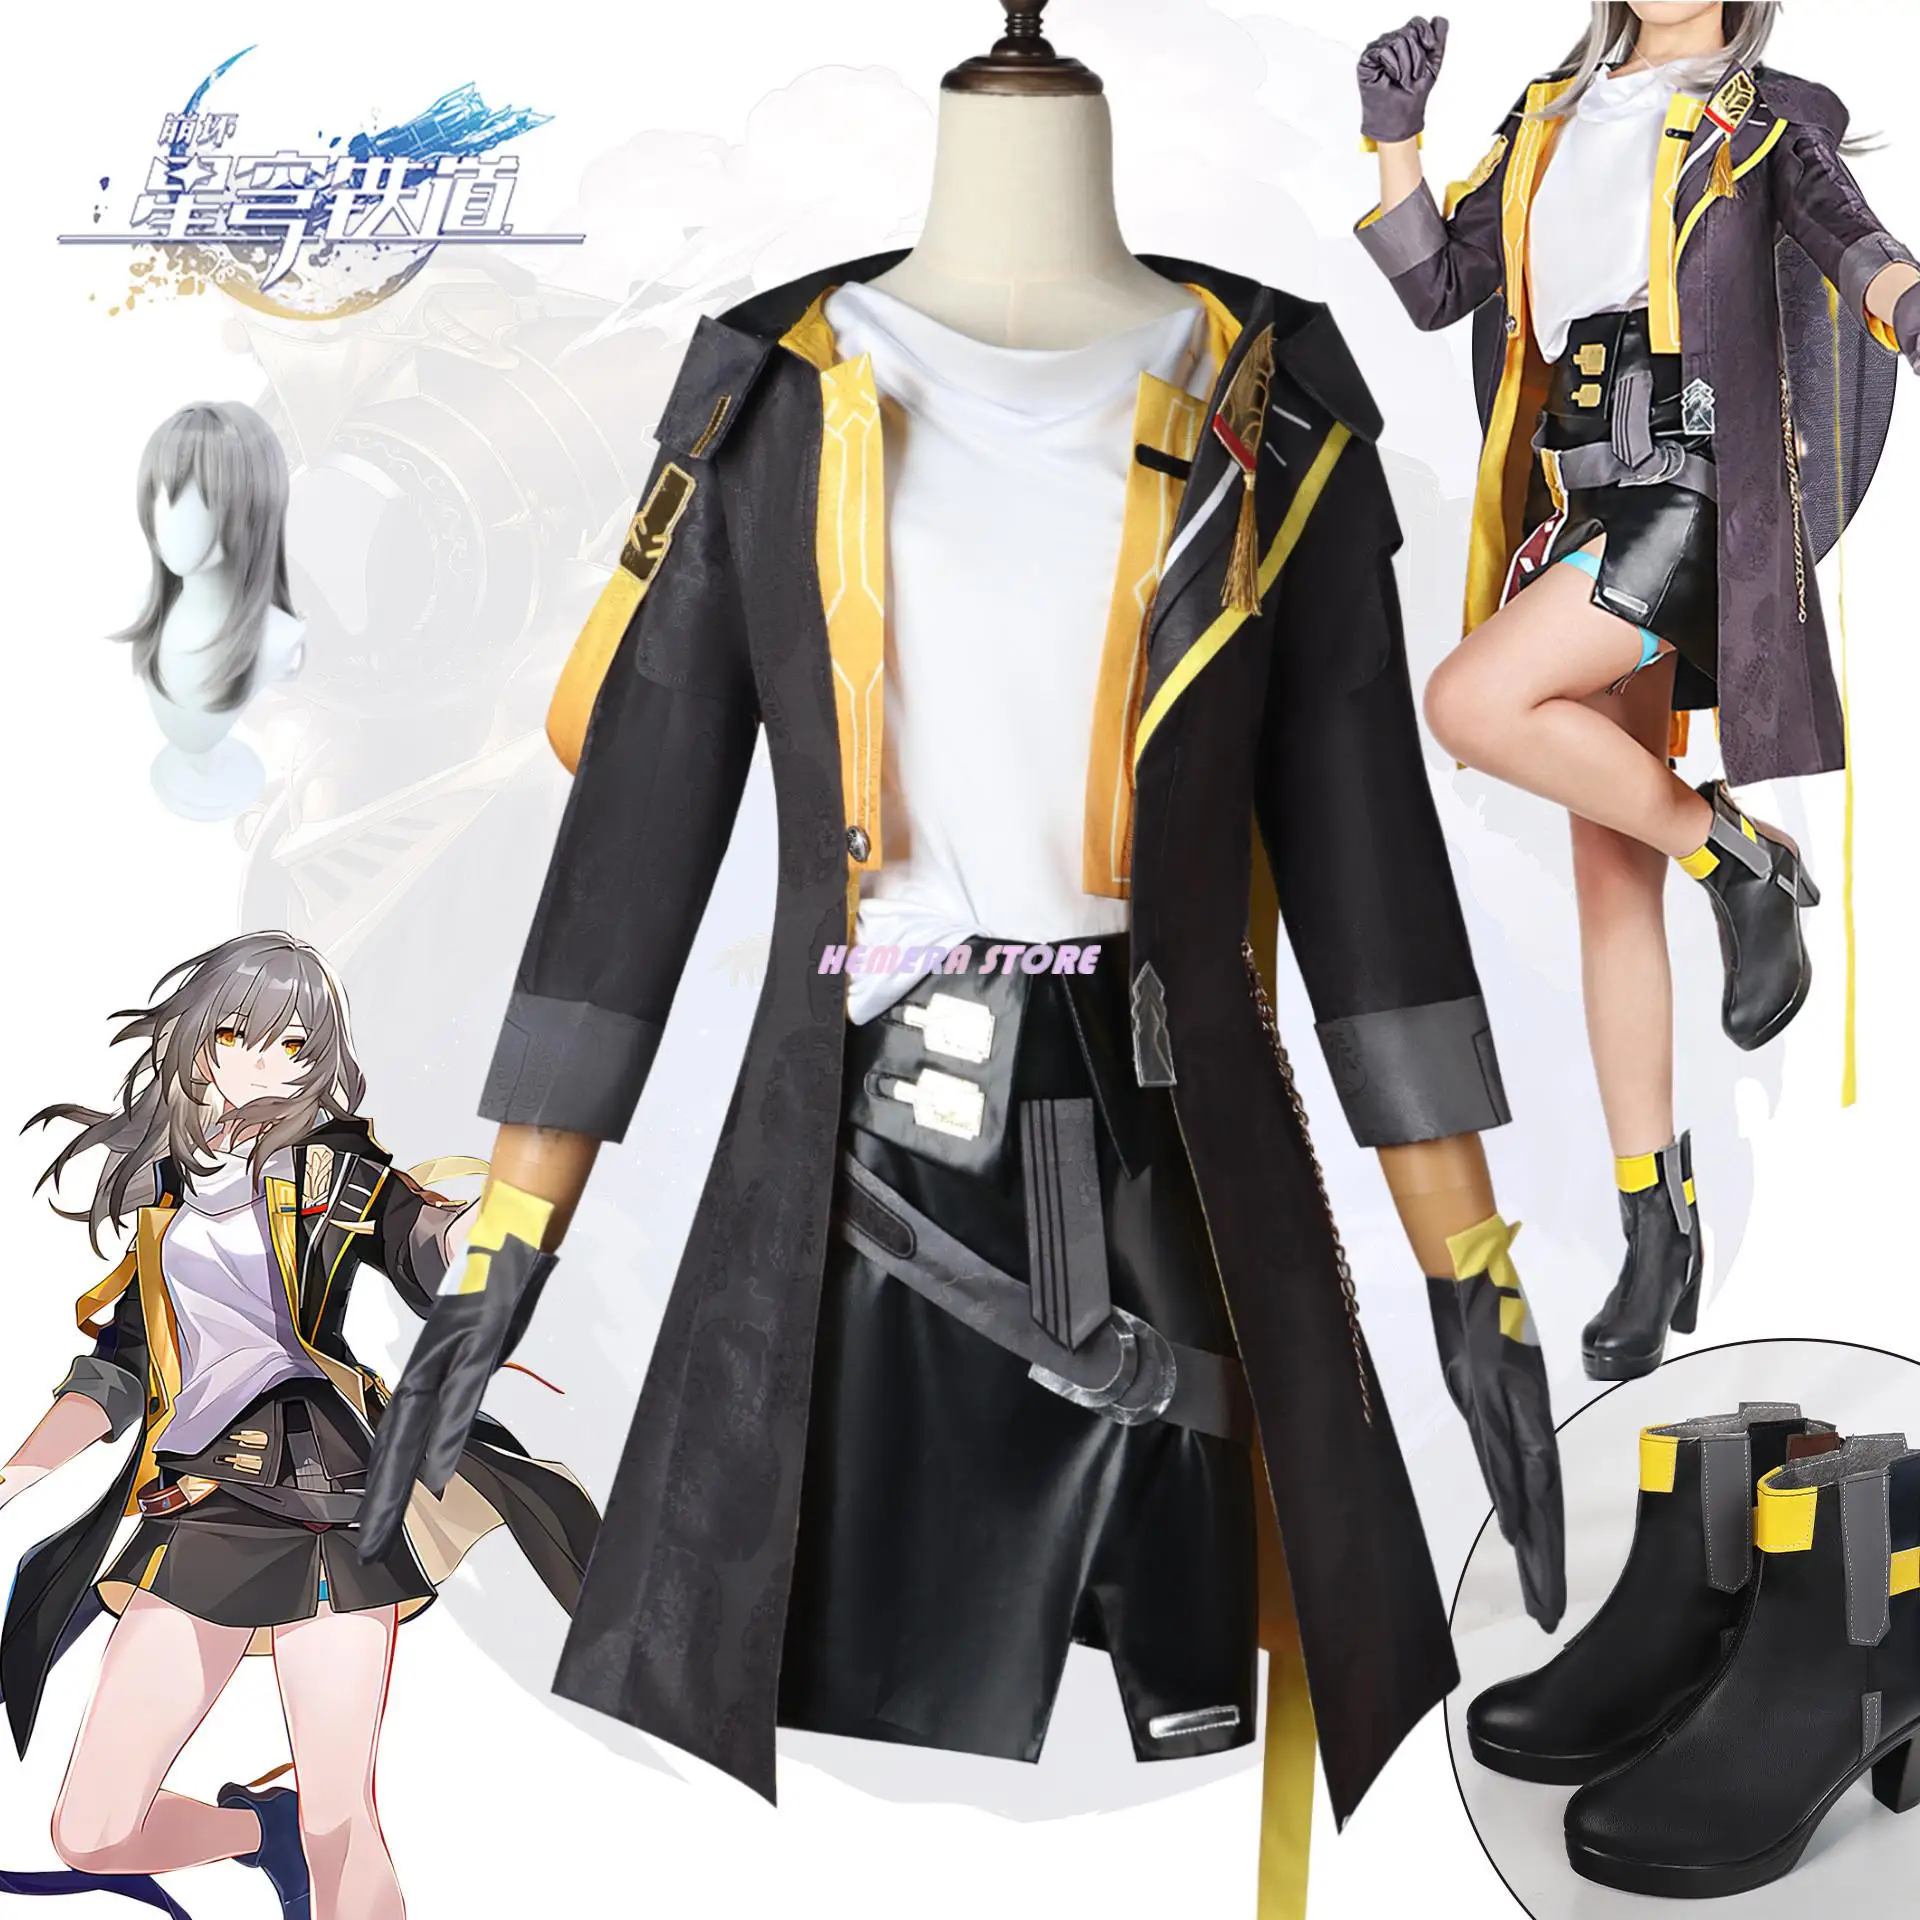 

Female Trailblazer Cosplay Anime Honkai Star Rail Costume Suit Women Fancy Dress Trench Outfit Wig Halloween Party Cos